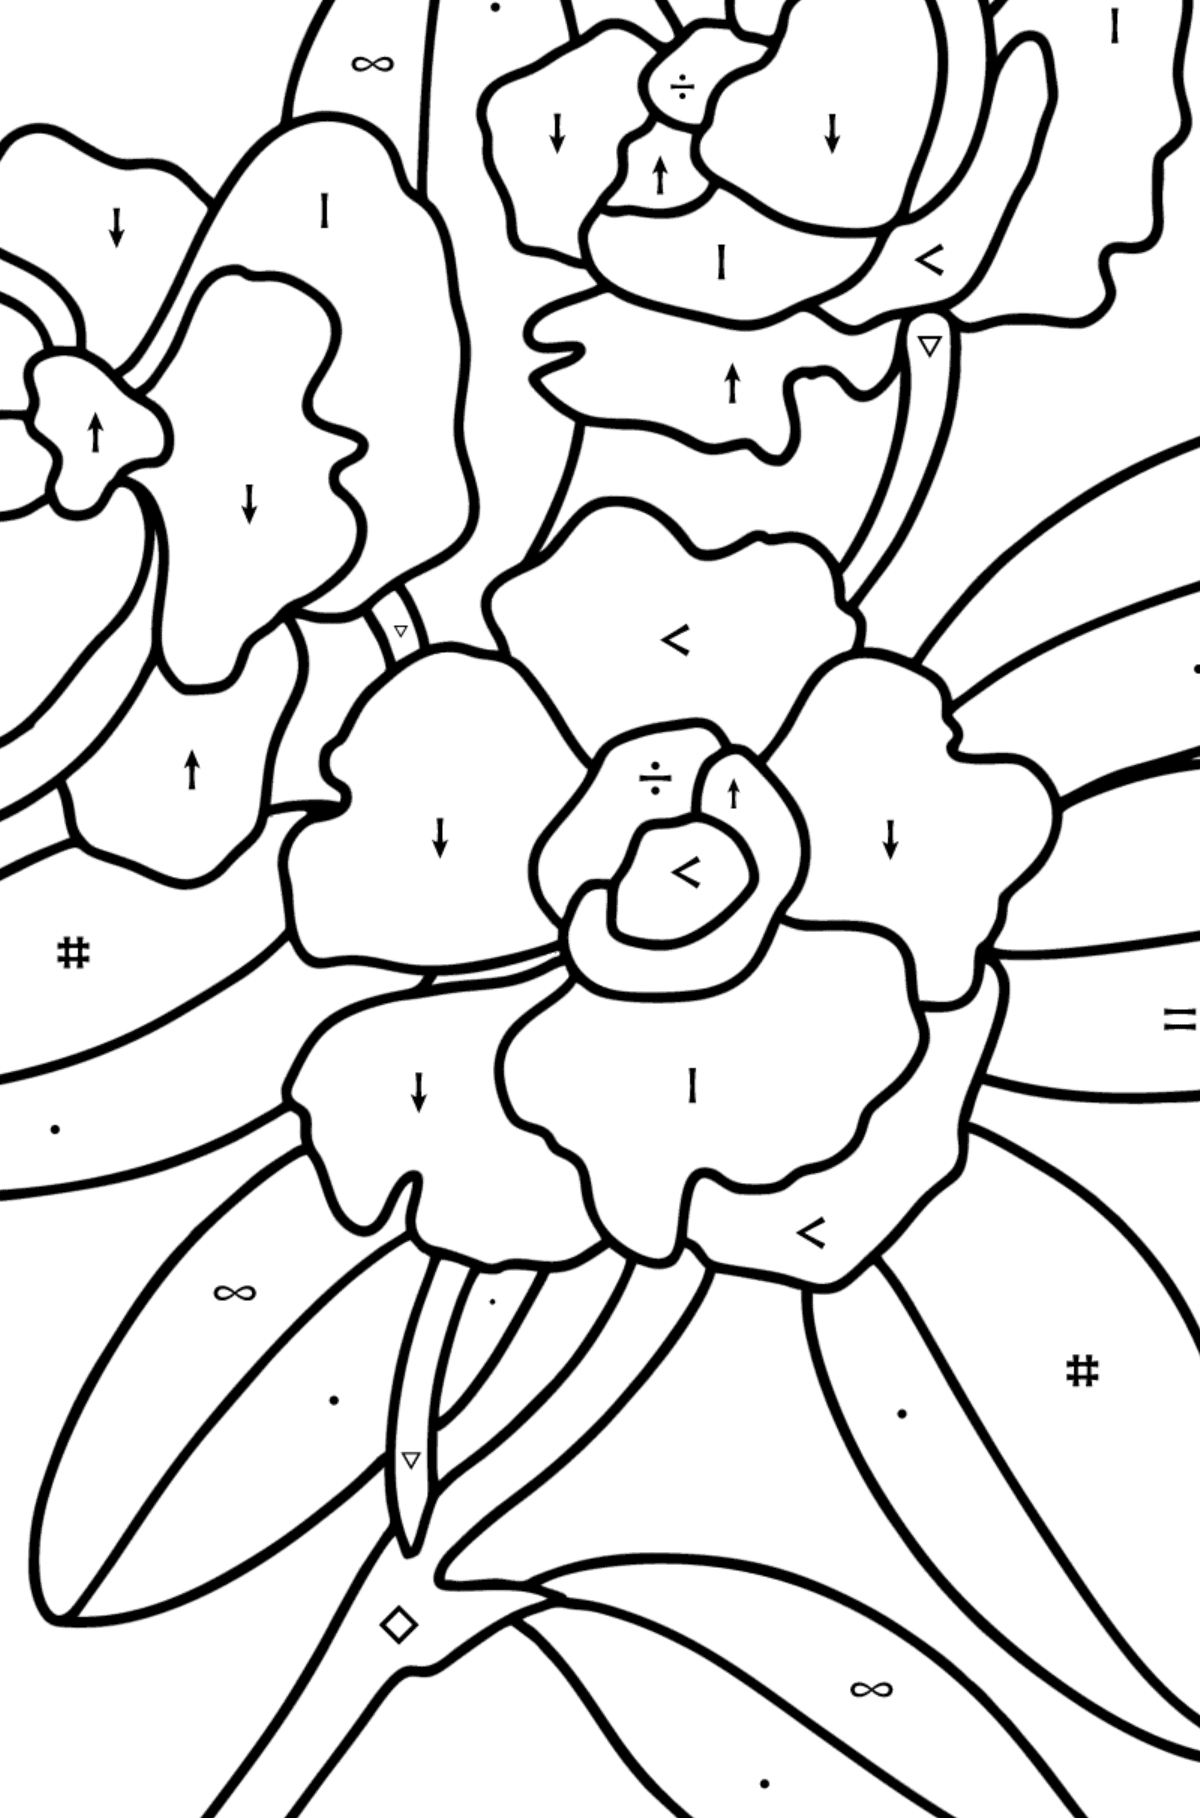 Gardenia coloring page - Coloring by Symbols for Kids